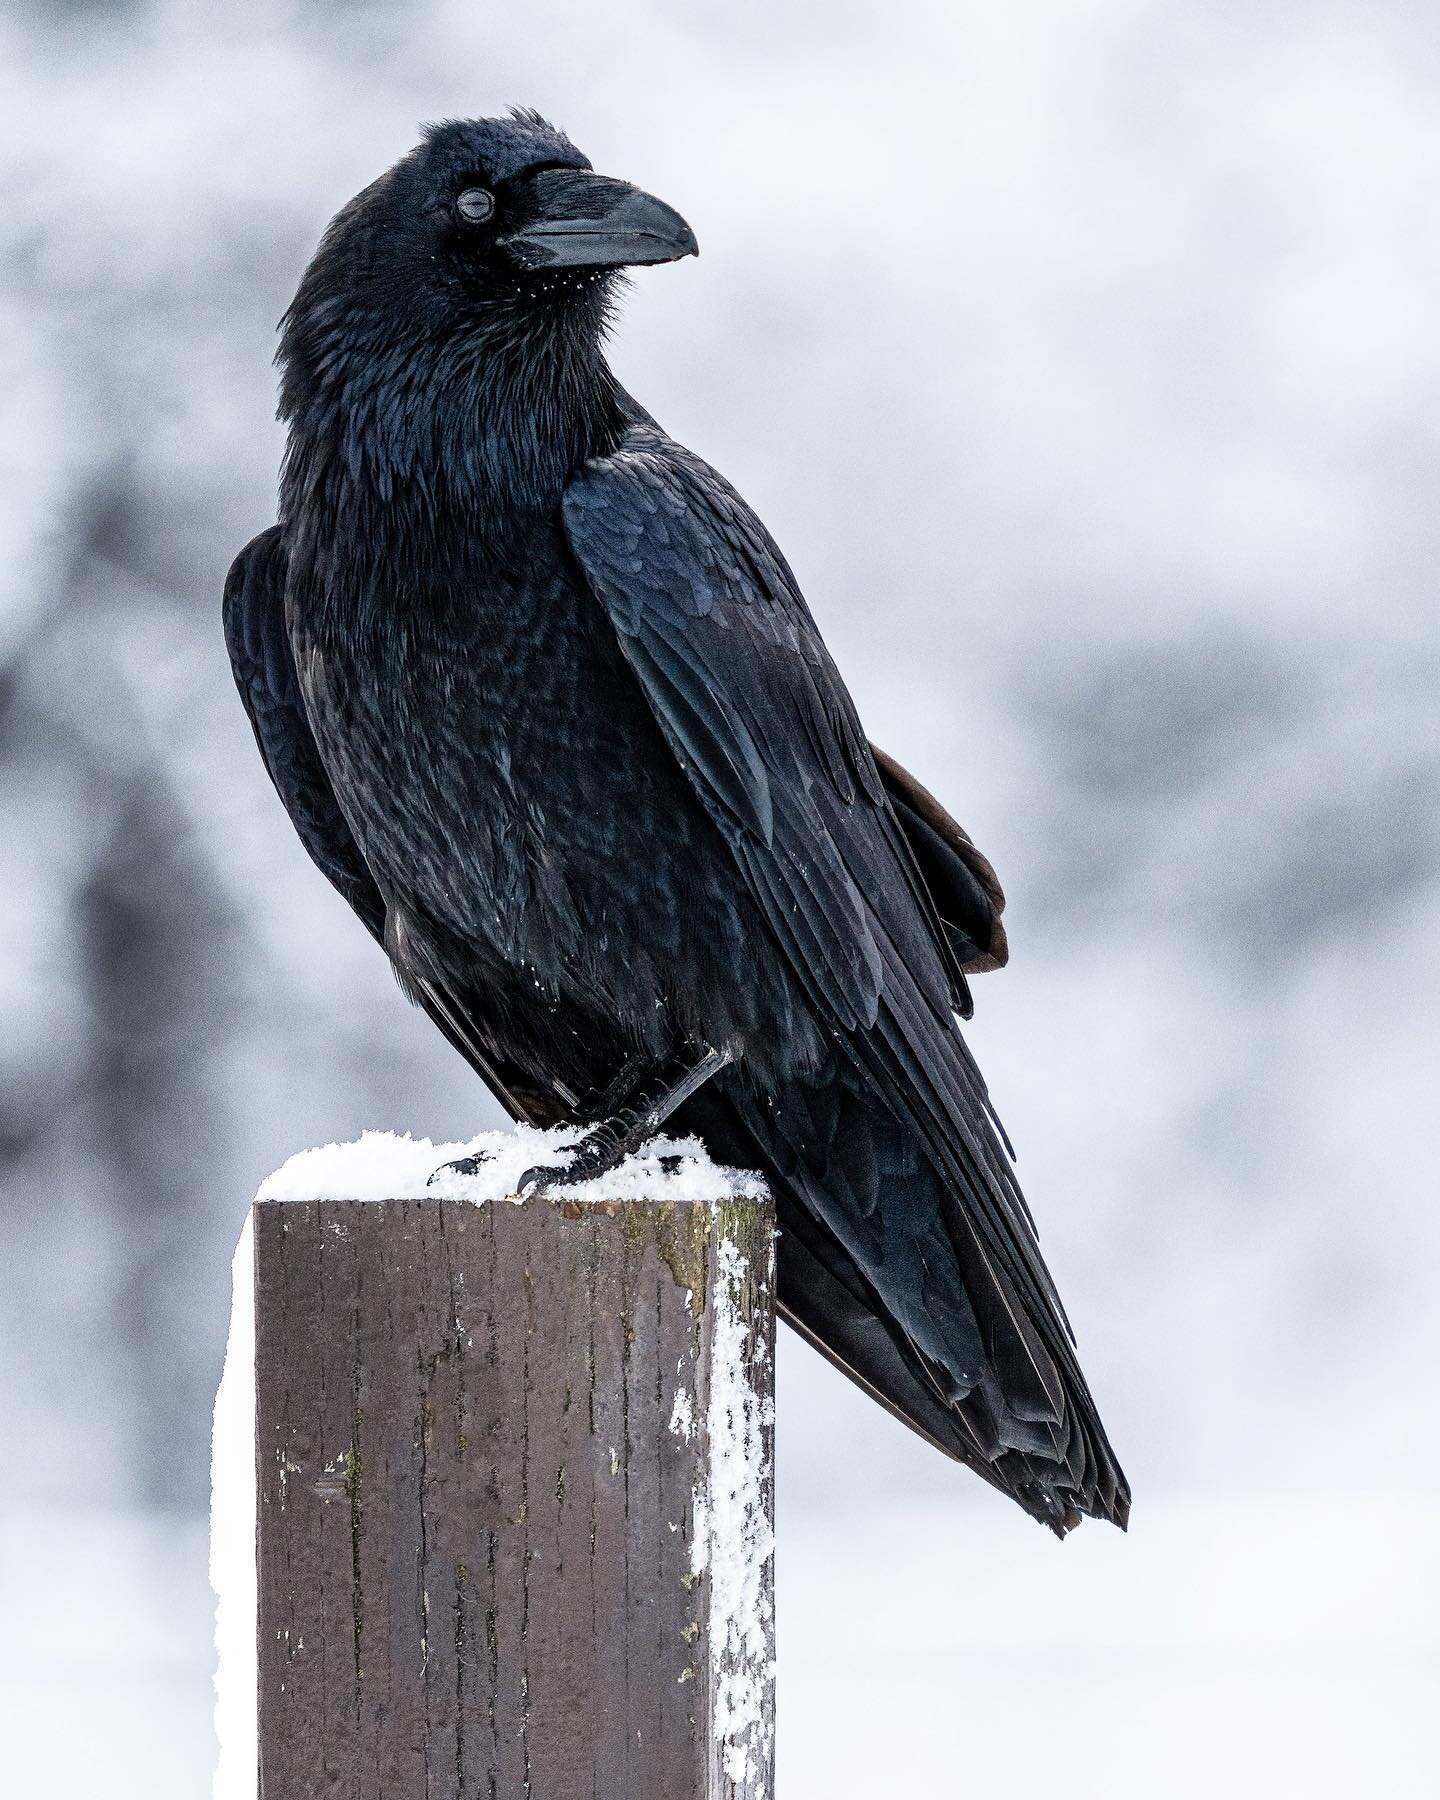 Here&rsquo;s a post of a raven on a post. (All the good captions were taken.)